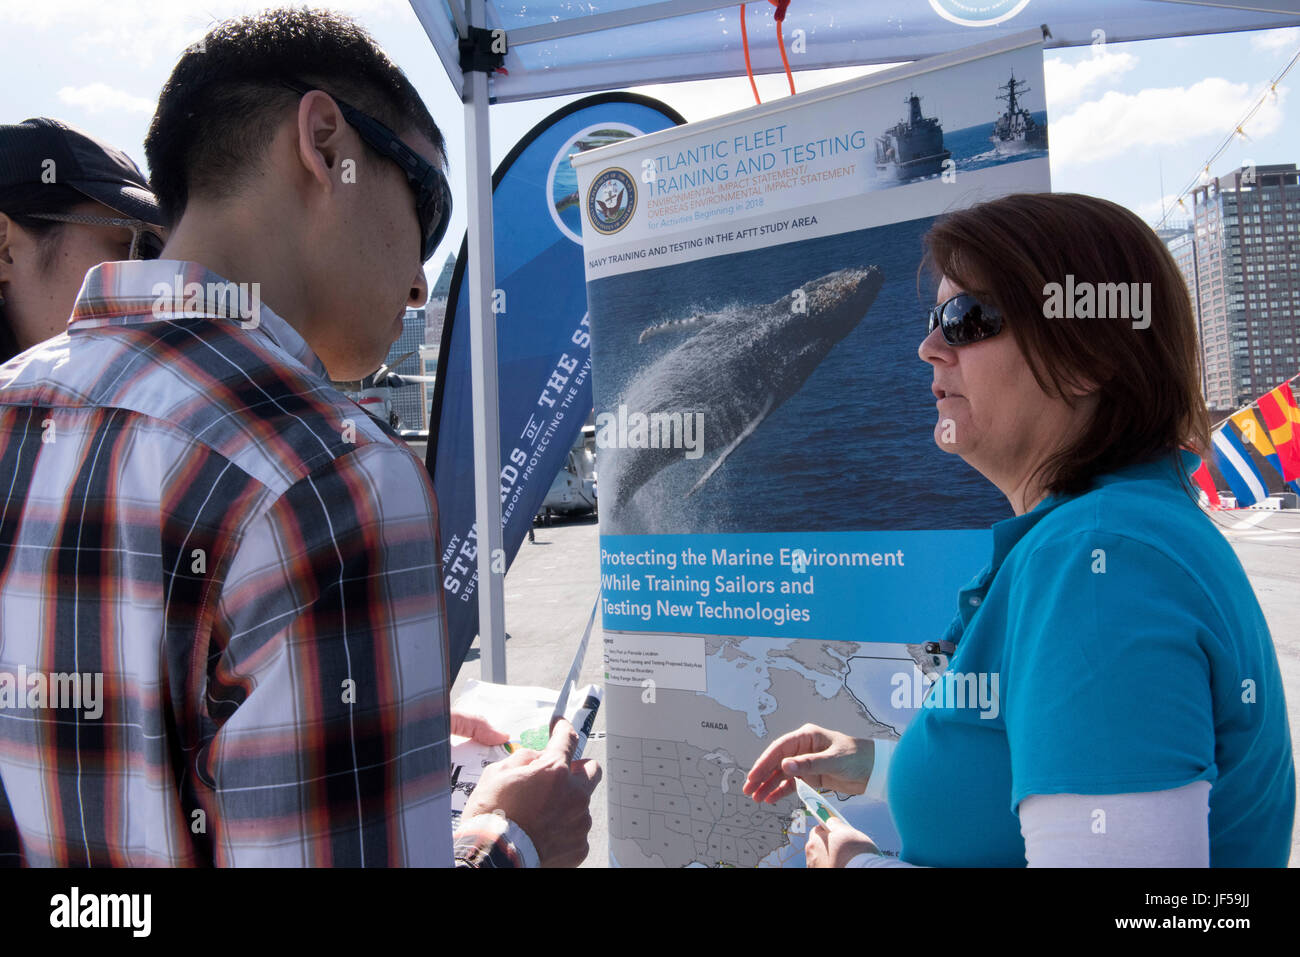 170527-N-MS174-001 NEW YORK (May 27, 2017) Laura Busch, right, a natural resources program manager at U.S. Fleet Forces Command (USFF), discusses the Atlantic Fleet Training and Testing (AFTT) study area with a visitor at the U.S. Navy’s “Stewards of the Sea: Defending Freedom, Protecting the Environment” exhibit aboard the amphibious assault ship USS Kearsarge (LHD 3) during Fleet Week New York. In accordance with the National Environmental Policy Act, USFF is currently in the process of preparing an Environmental Impact Statement to reassess the potential environmental impacts associated wit Stock Photo